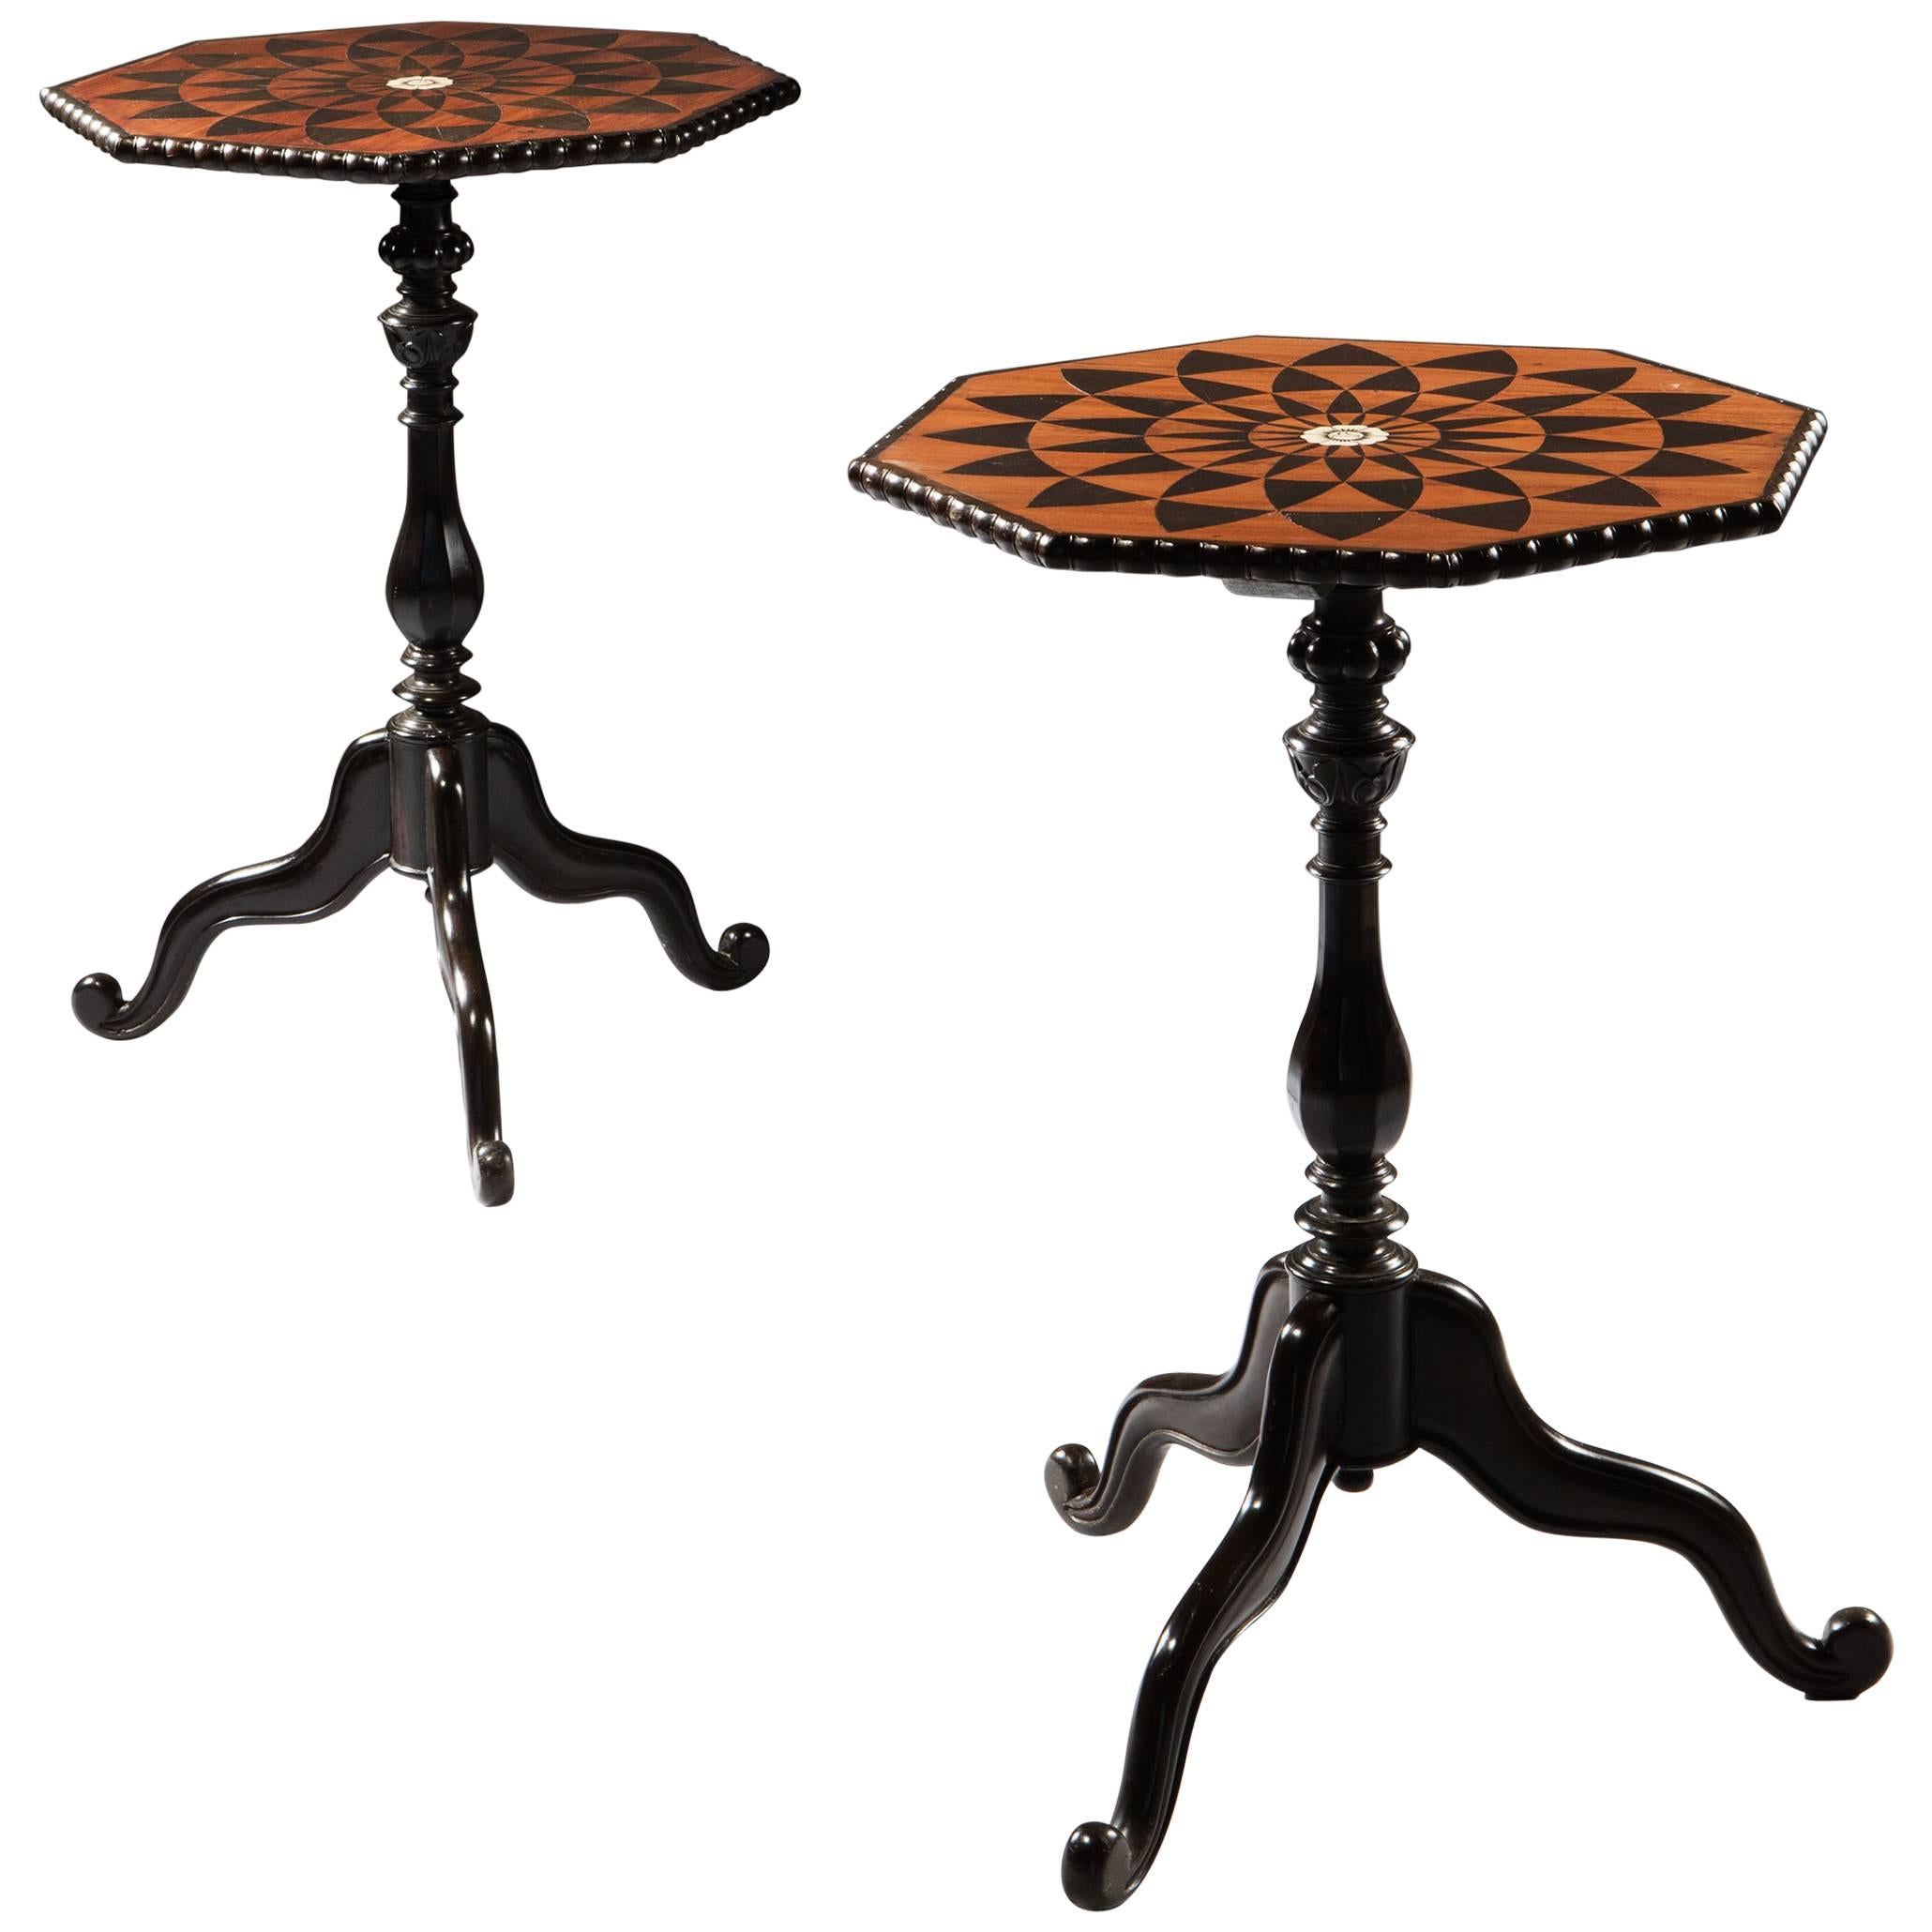 Pair of Anglo-Indian Octagonal Parquetry Tables